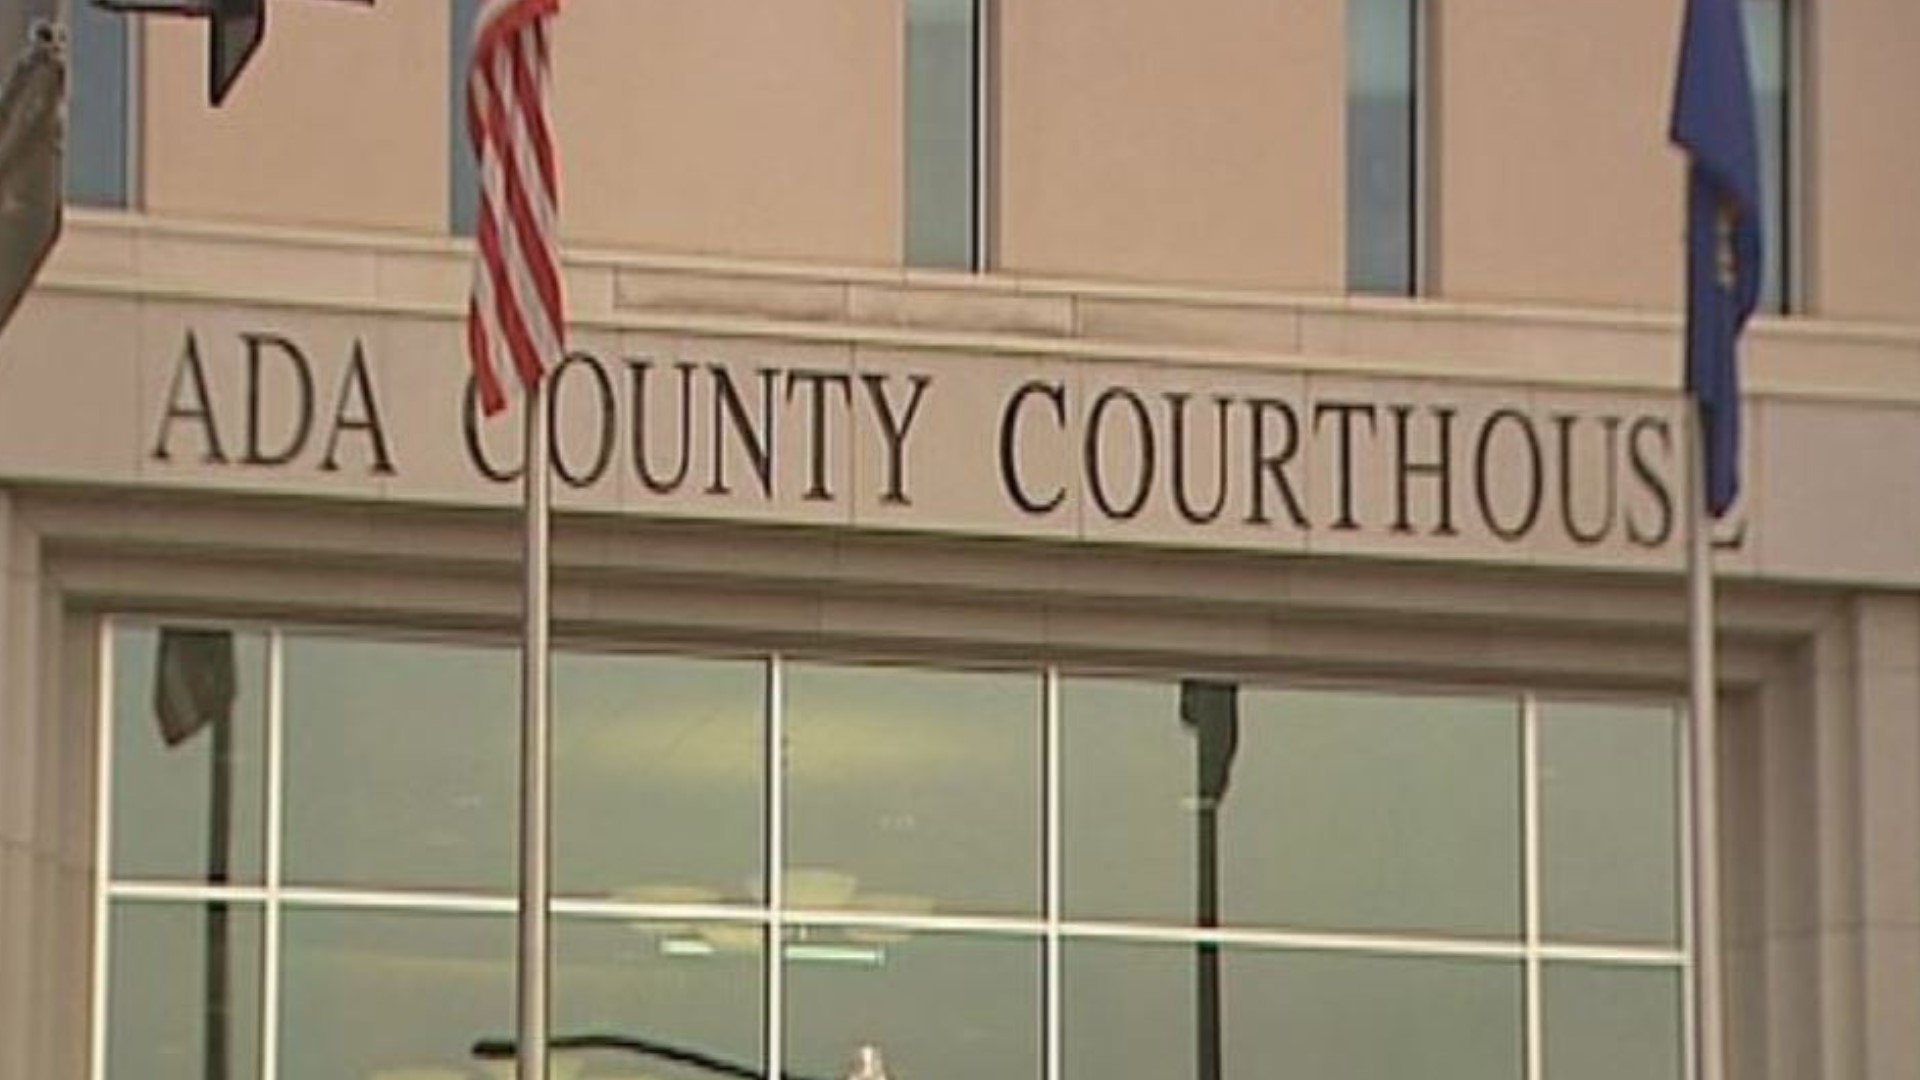 Just three weeks after resuming jury trials, Ada County will pause trials due to an uptick in COVID-19 cases.